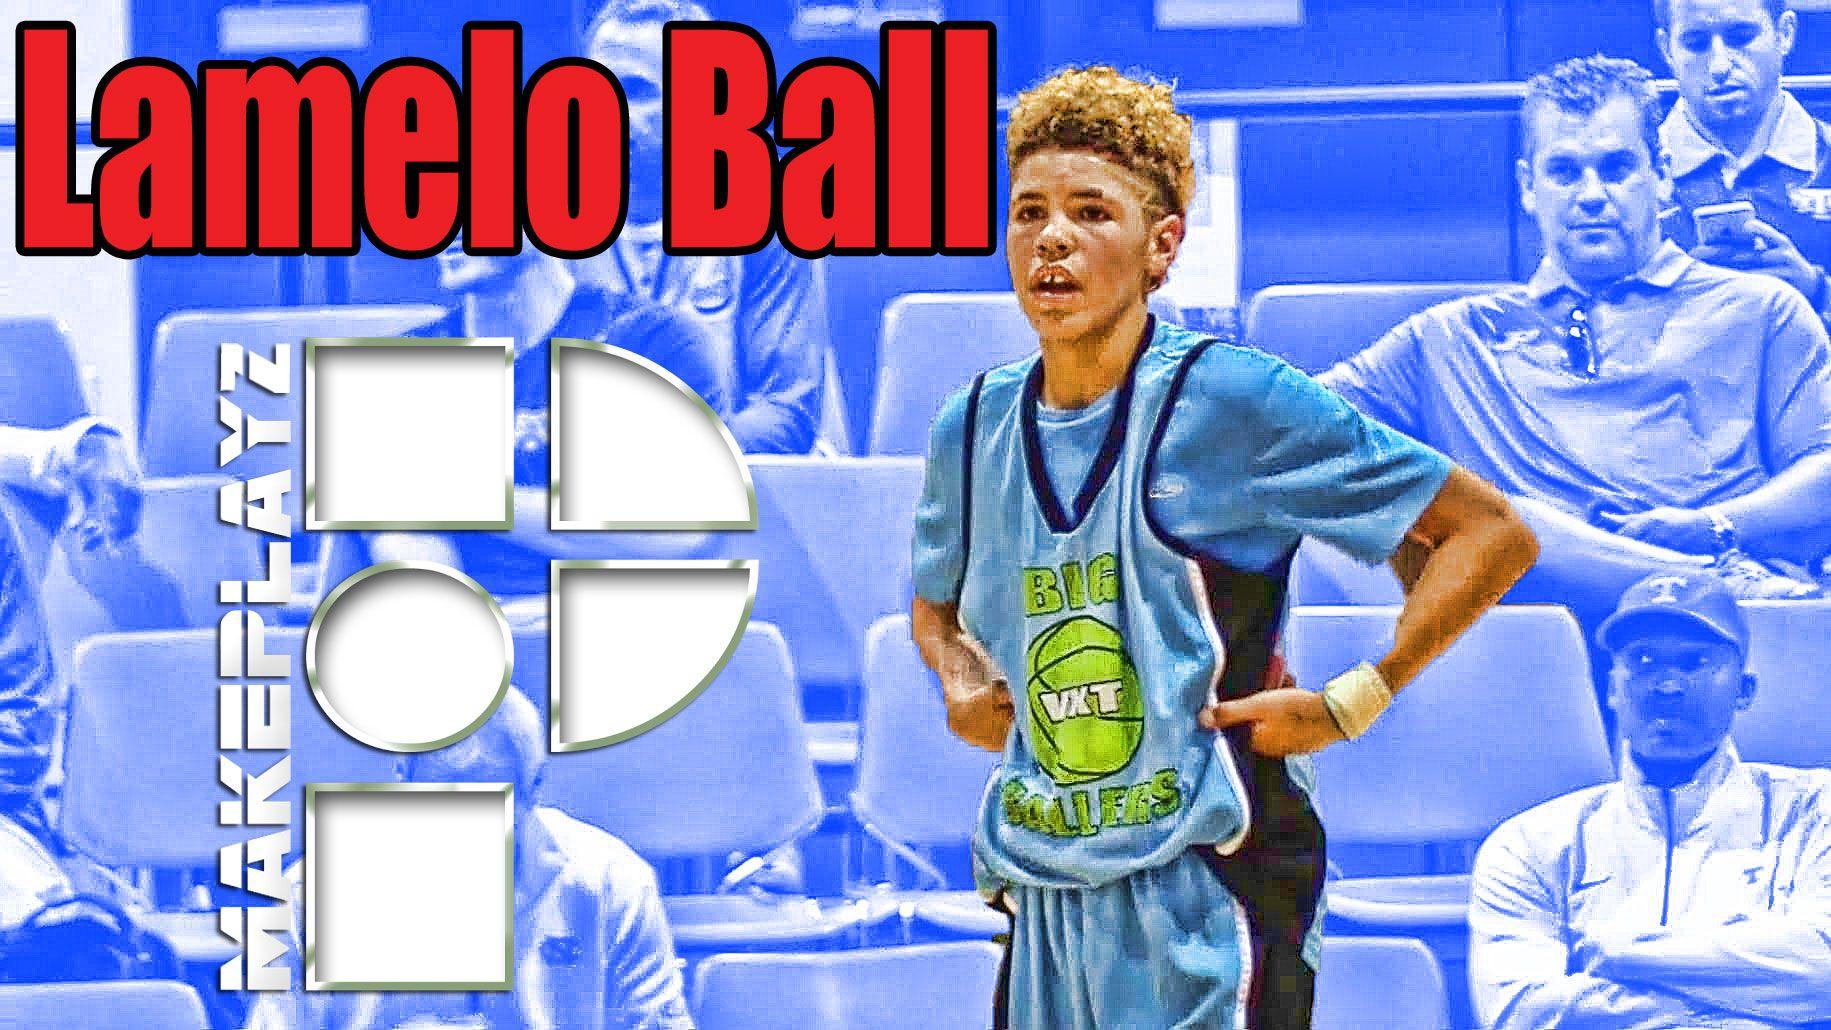 8th Grader Lamelo Ball Dropped 32 on 17U Comp Last Year!